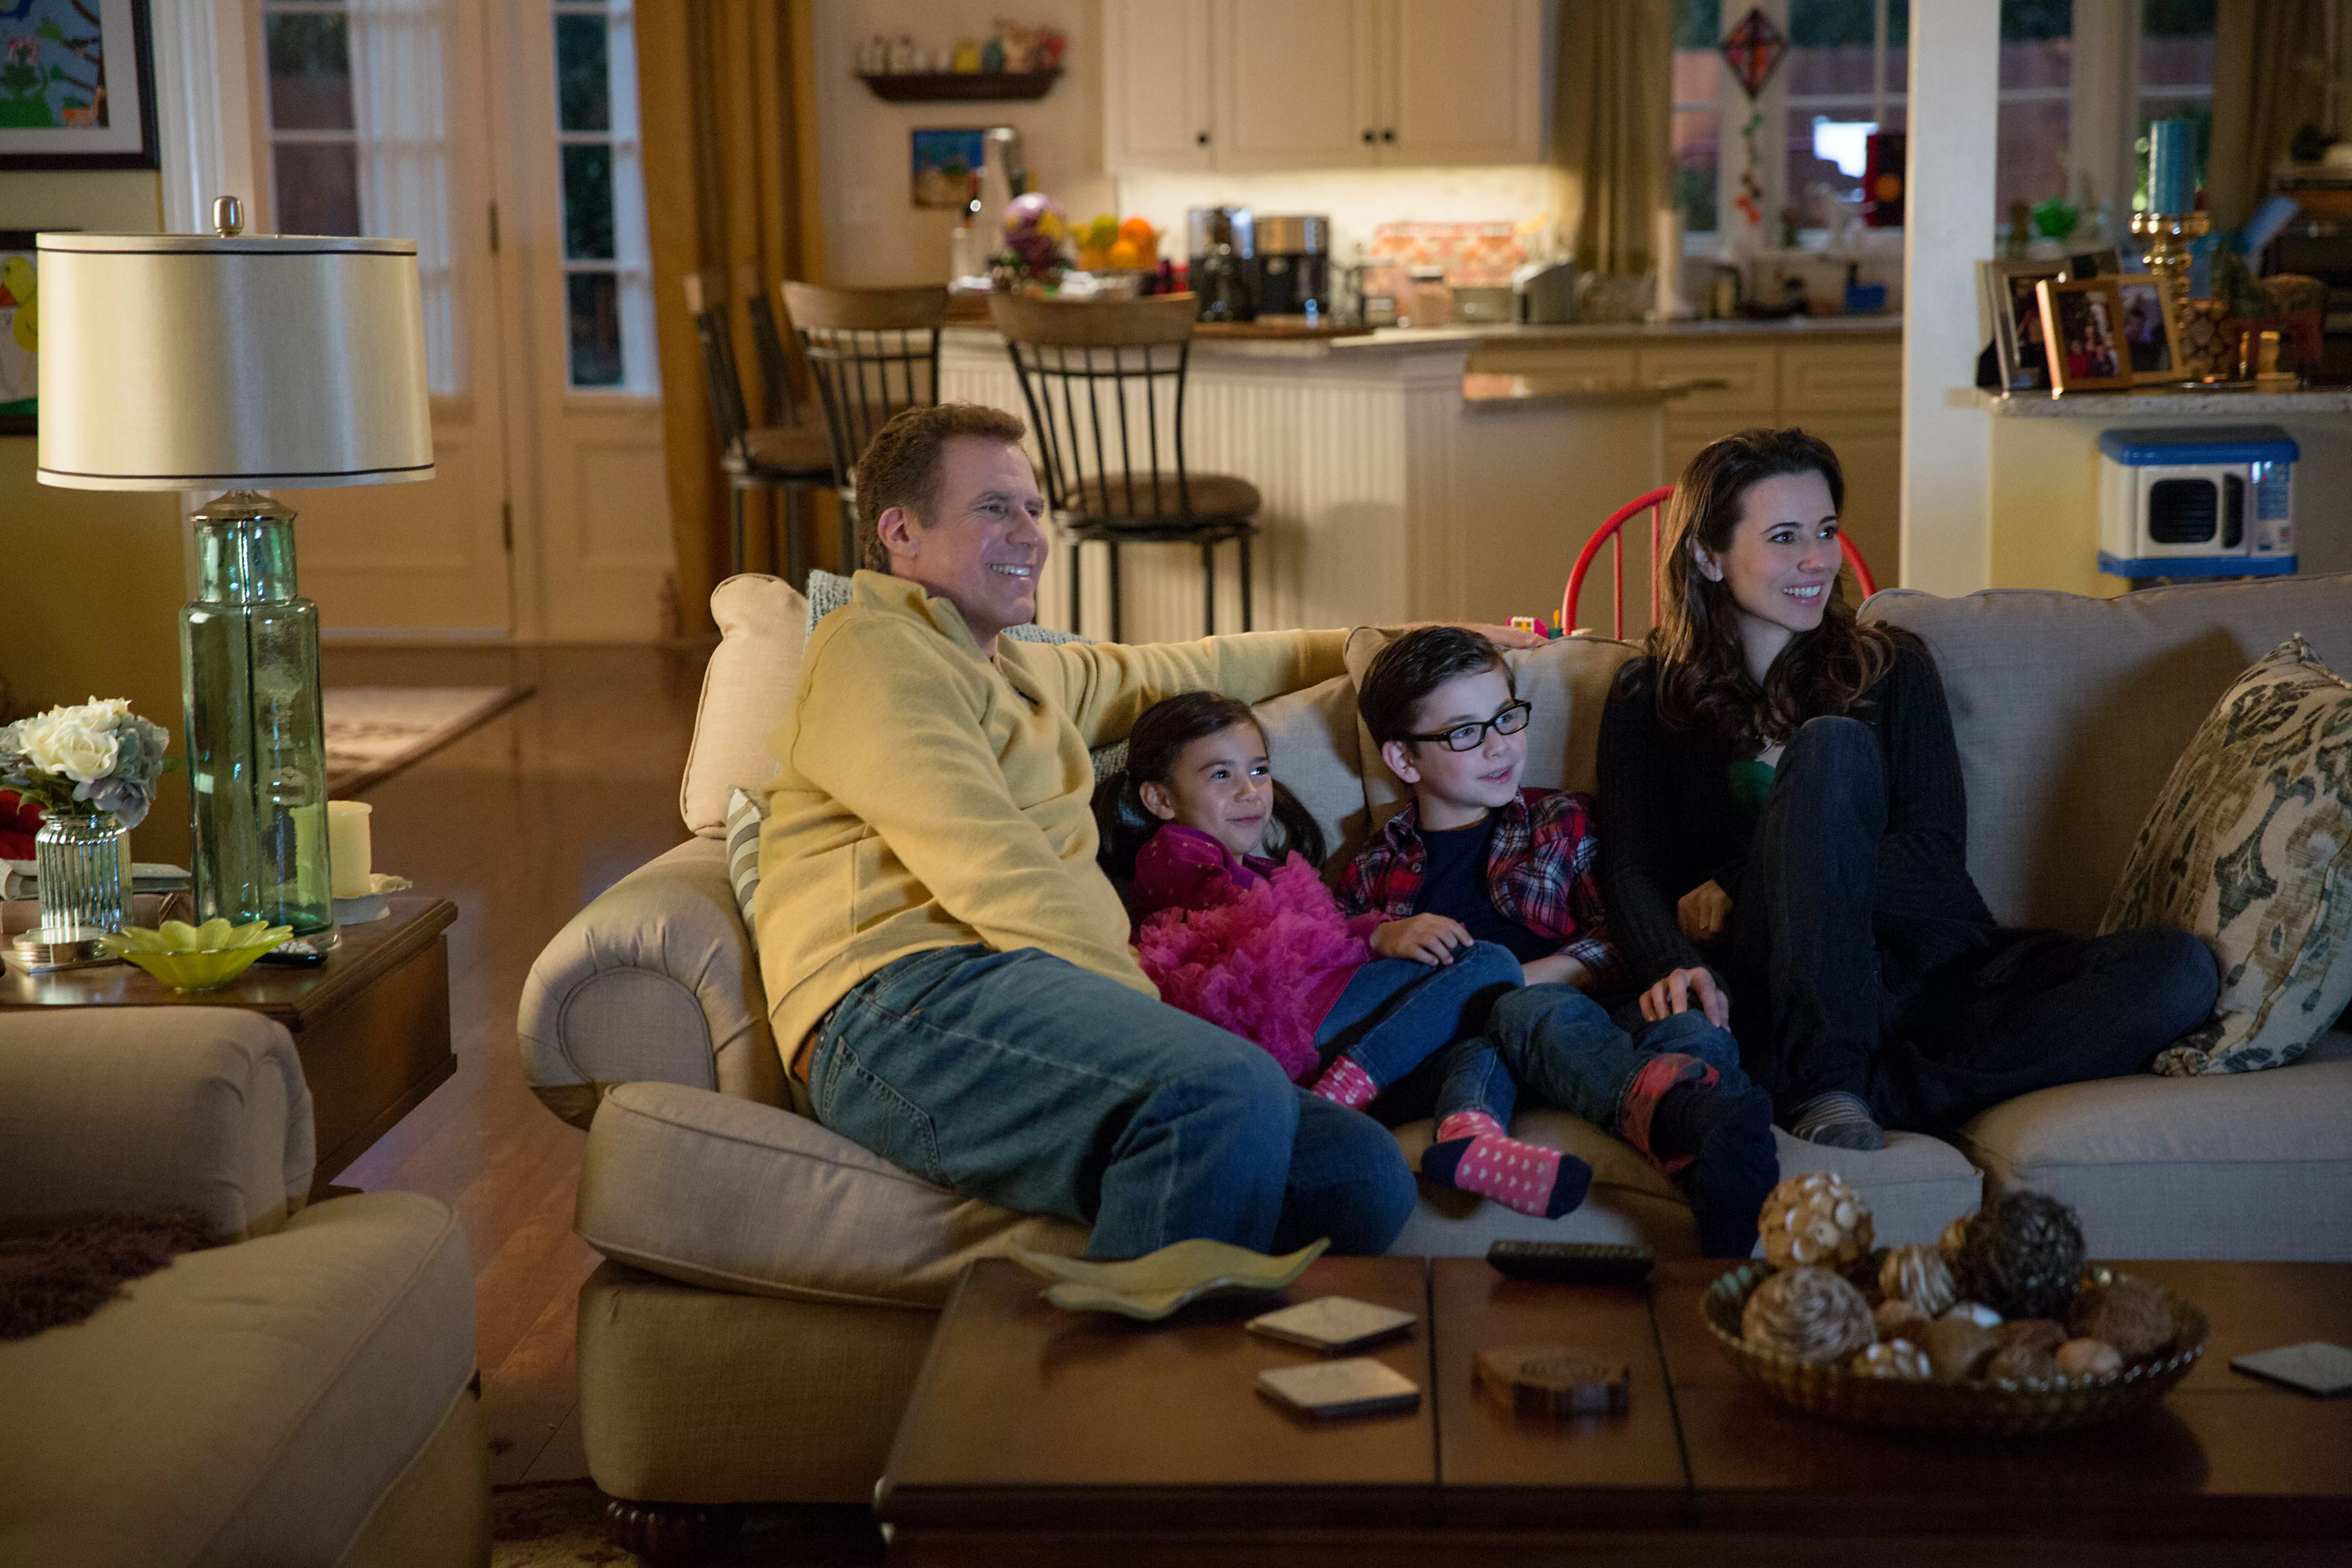 Left to right: Will Ferrell plays Brad Whitaker, Scarlett Estevez plays Megan, Owen Vaccaro plays Dylan, and Linda Cardellini plays Sara in Daddy’s Home from Paramount Pictures and Red Granite Pictures